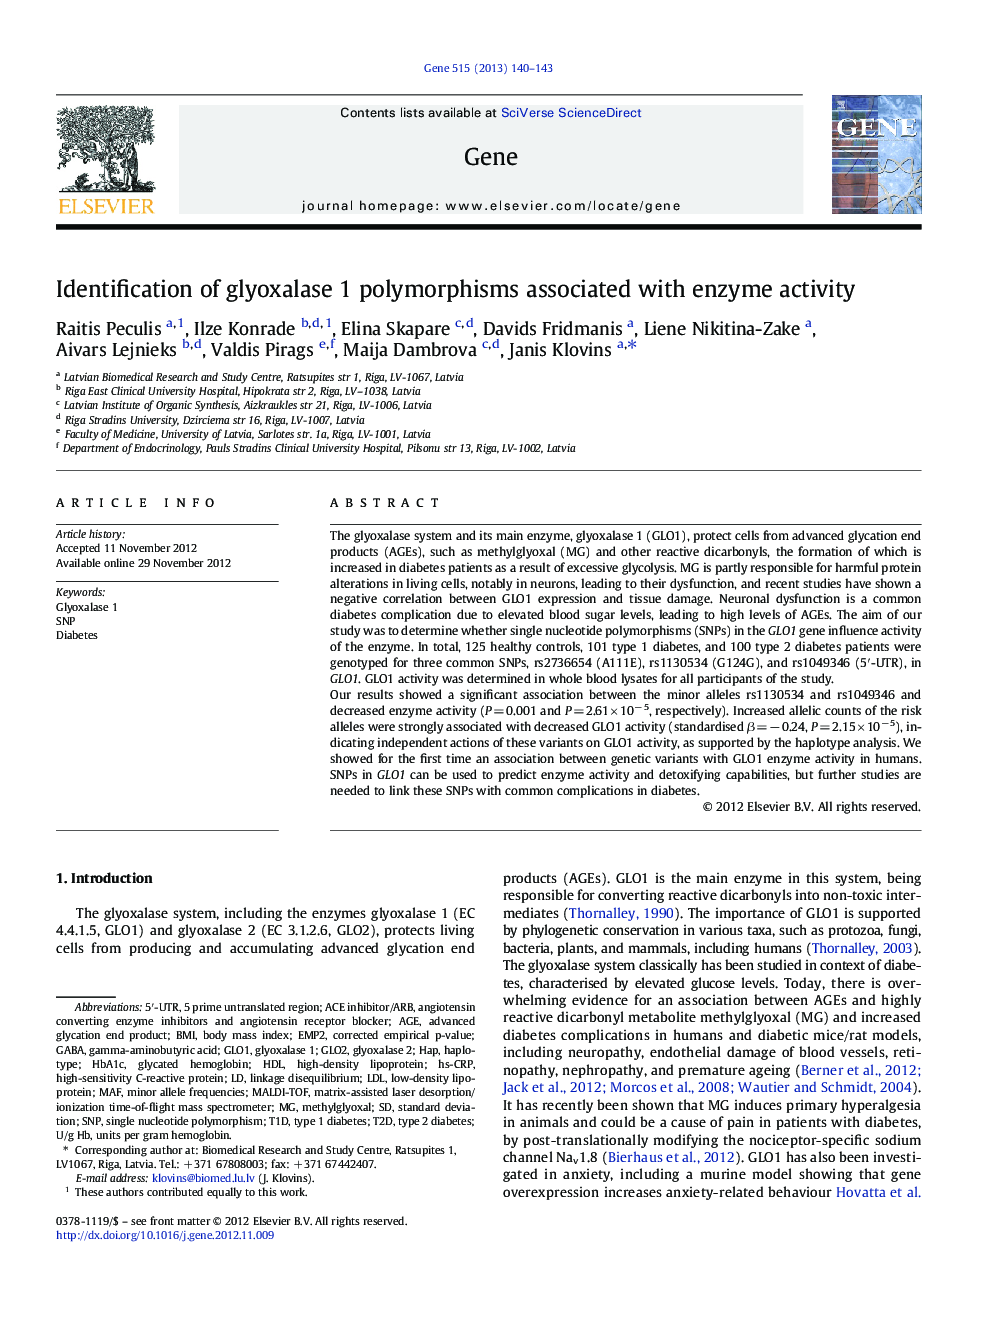 Identification of glyoxalase 1 polymorphisms associated with enzyme activity